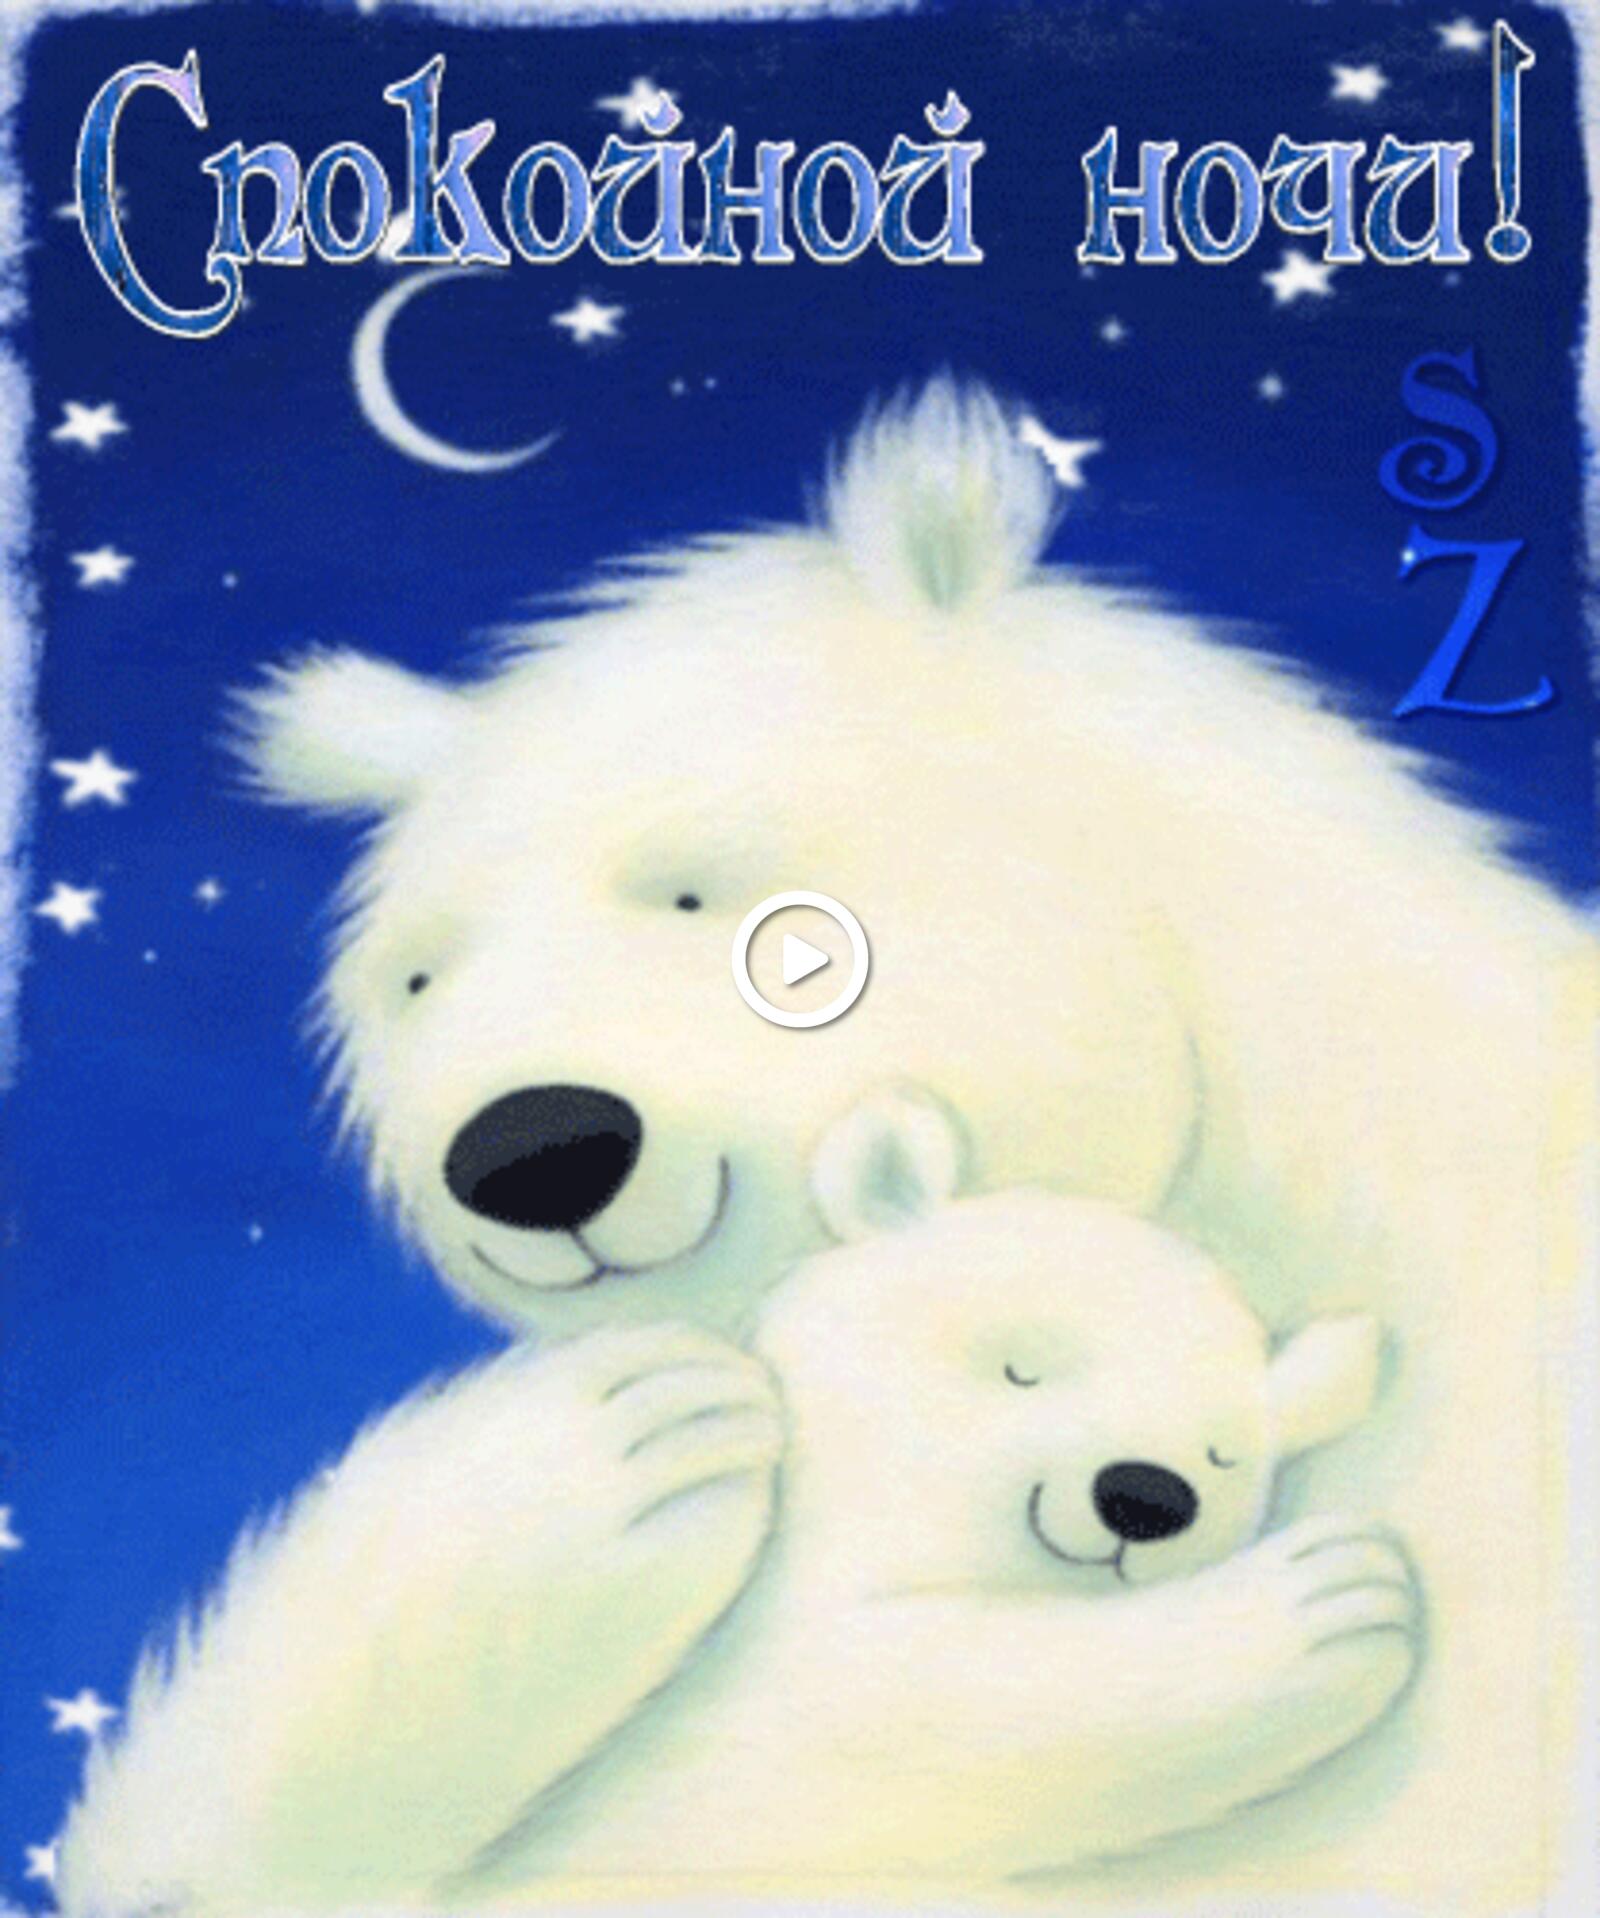 A postcard on the subject of good night bears request for free